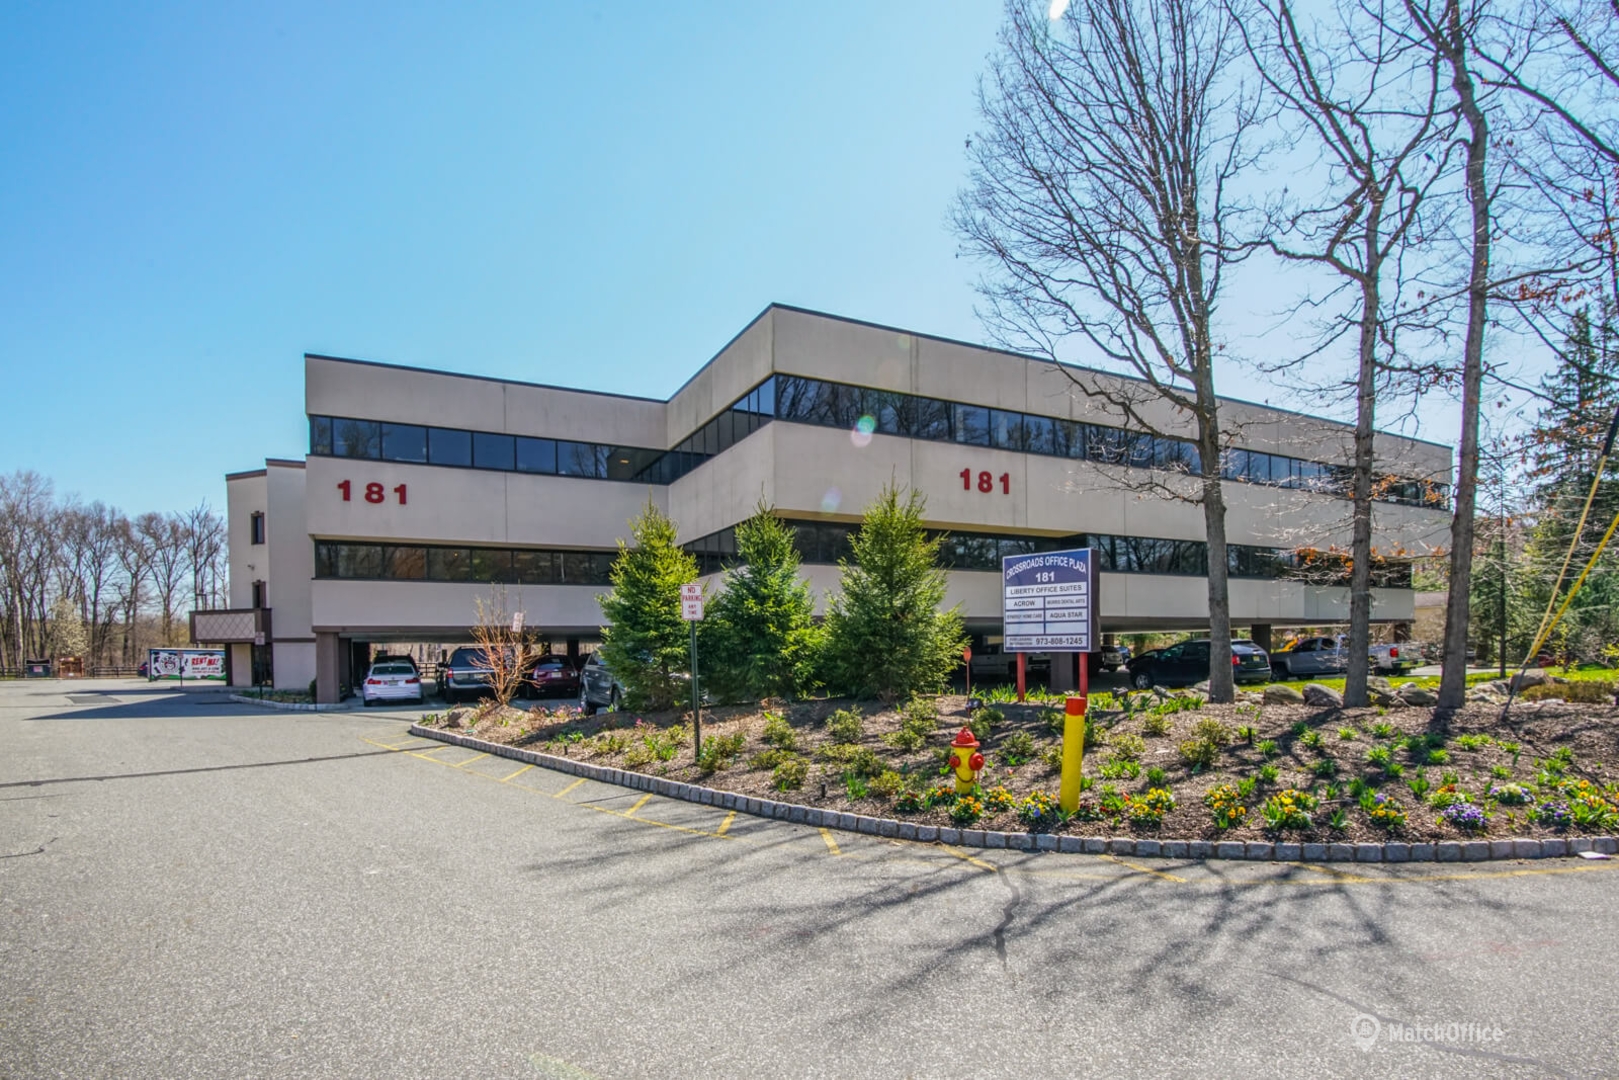 Prestigious Shared Office Space for Lease on New Road 181, Parsippany, NJ ✓  